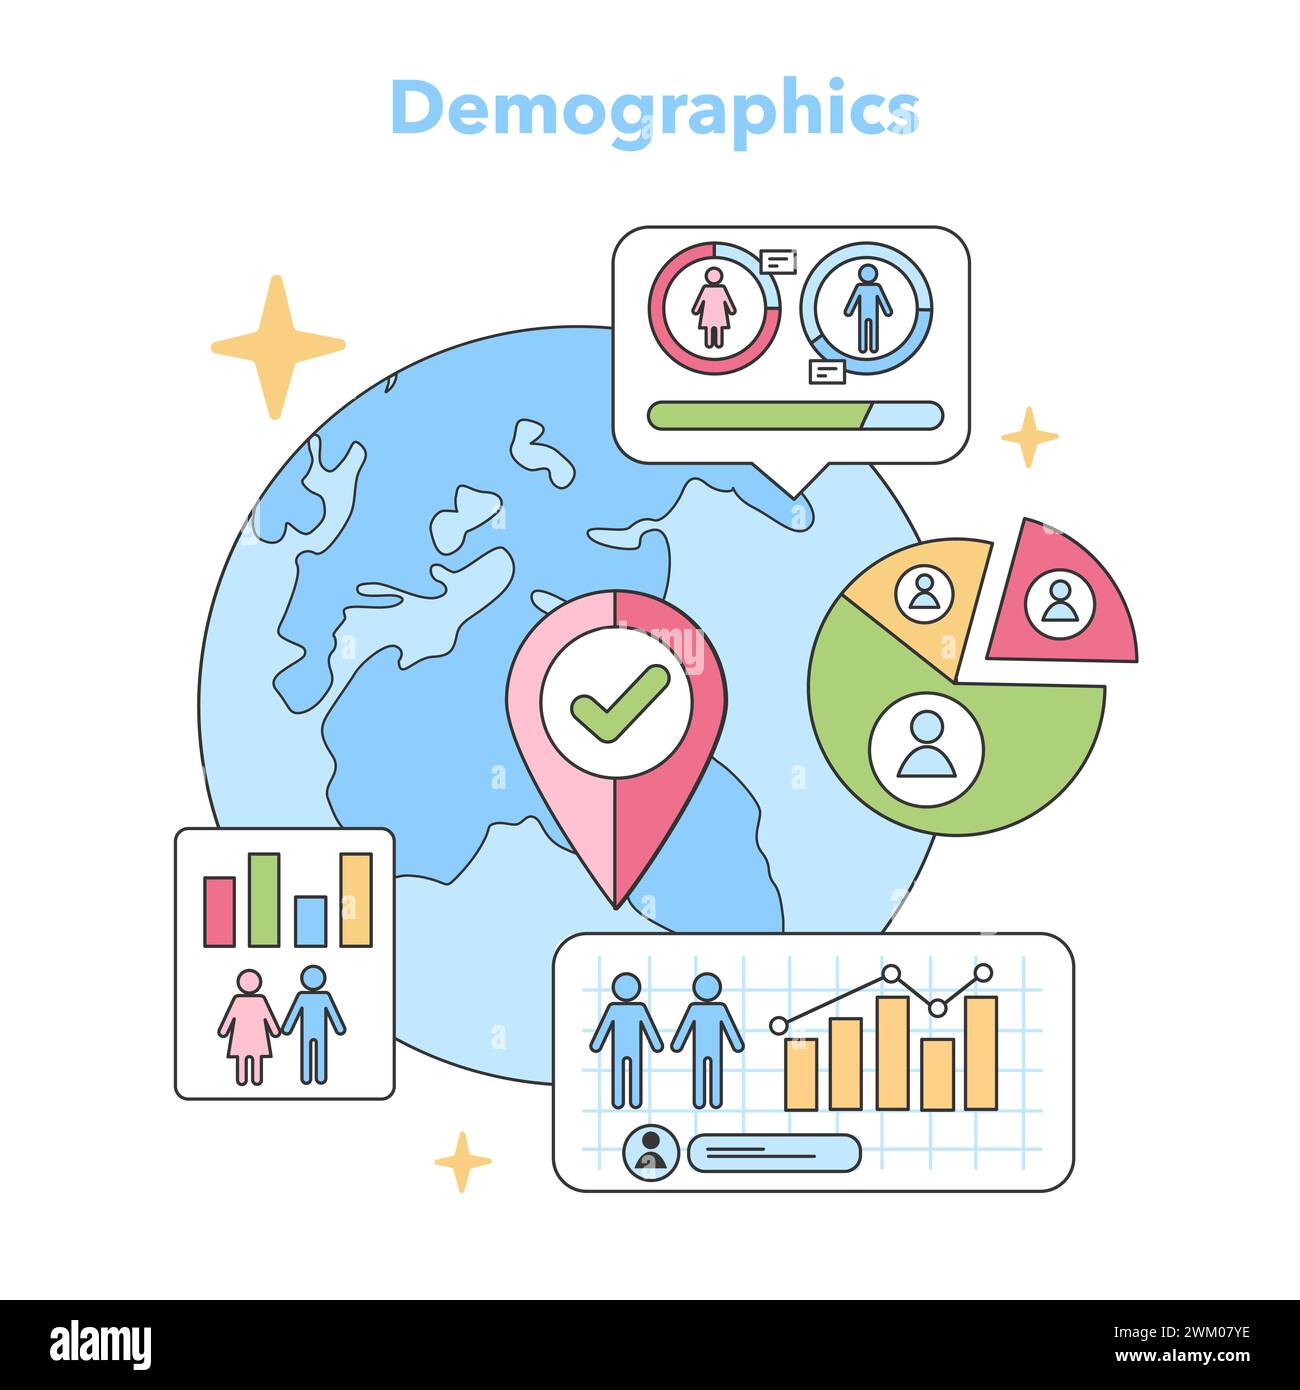 Demographics analysis concept. Global map highlighting specific regions, computer screen showcasing gender statistics, pie charts detailing population segments, and a bar graph for trend visualization Stock Vector